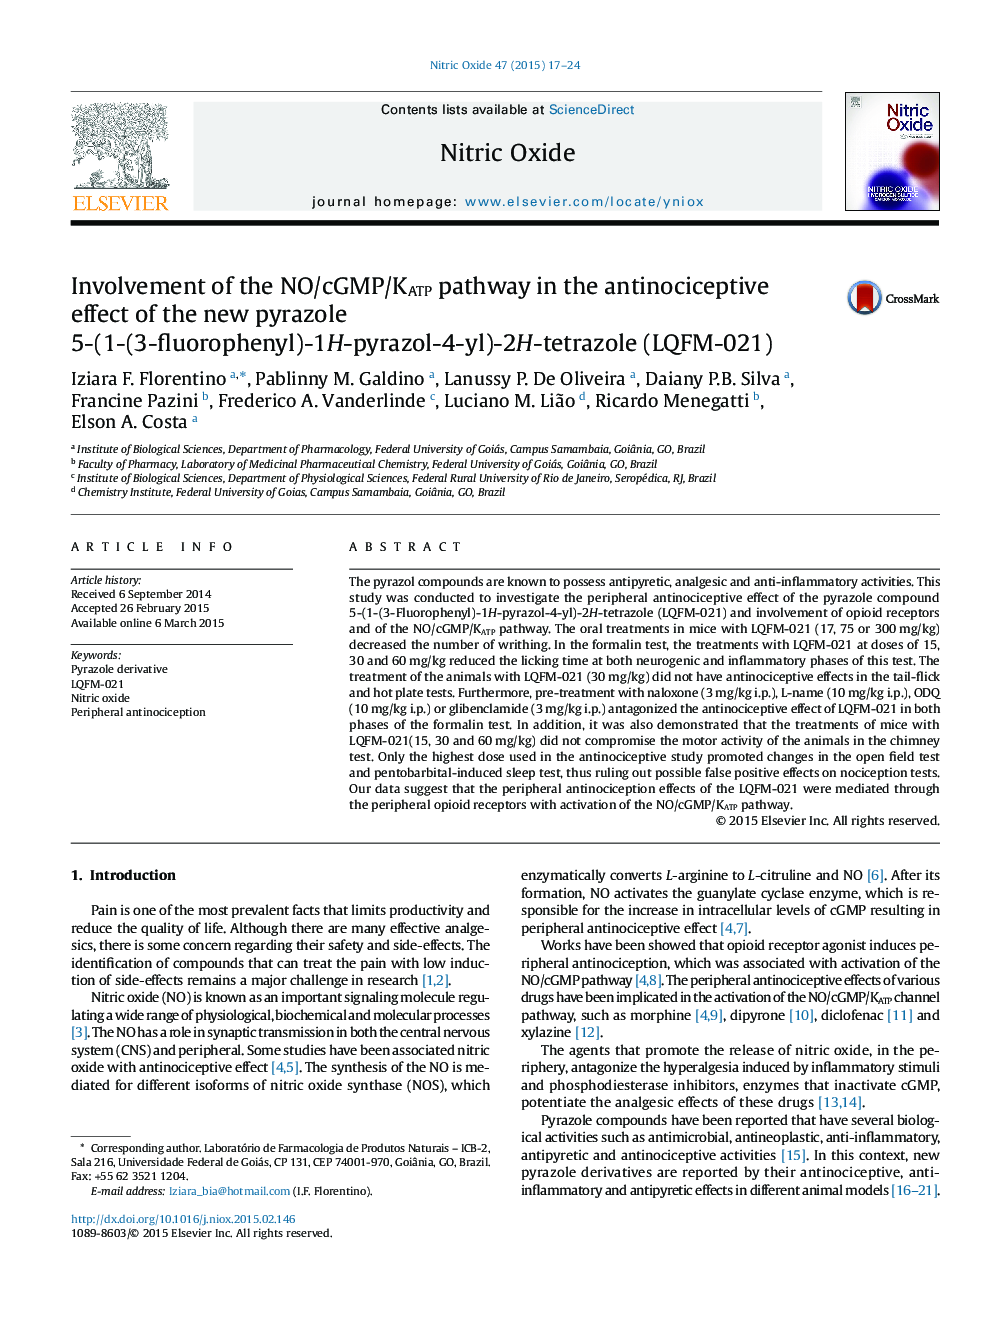 Involvement of the NO/cGMP/KATP pathway in the antinociceptive effect of the new pyrazole 5-(1-(3-fluorophenyl)-1H-pyrazol-4-yl)-2H-tetrazole (LQFM-021)